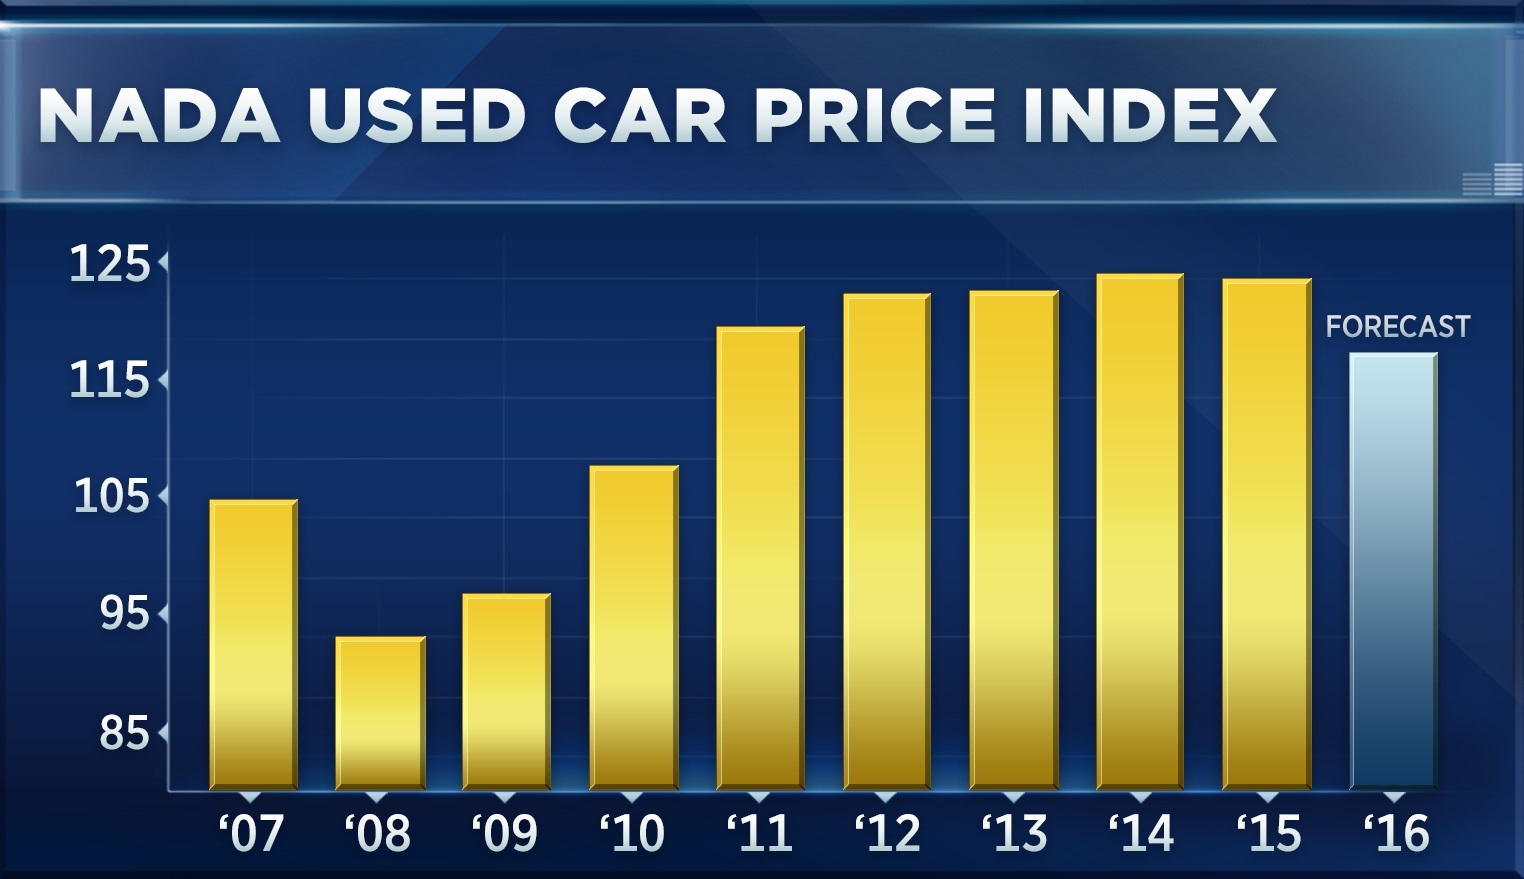 Its the first time since 2008 that prices of used cars are falling